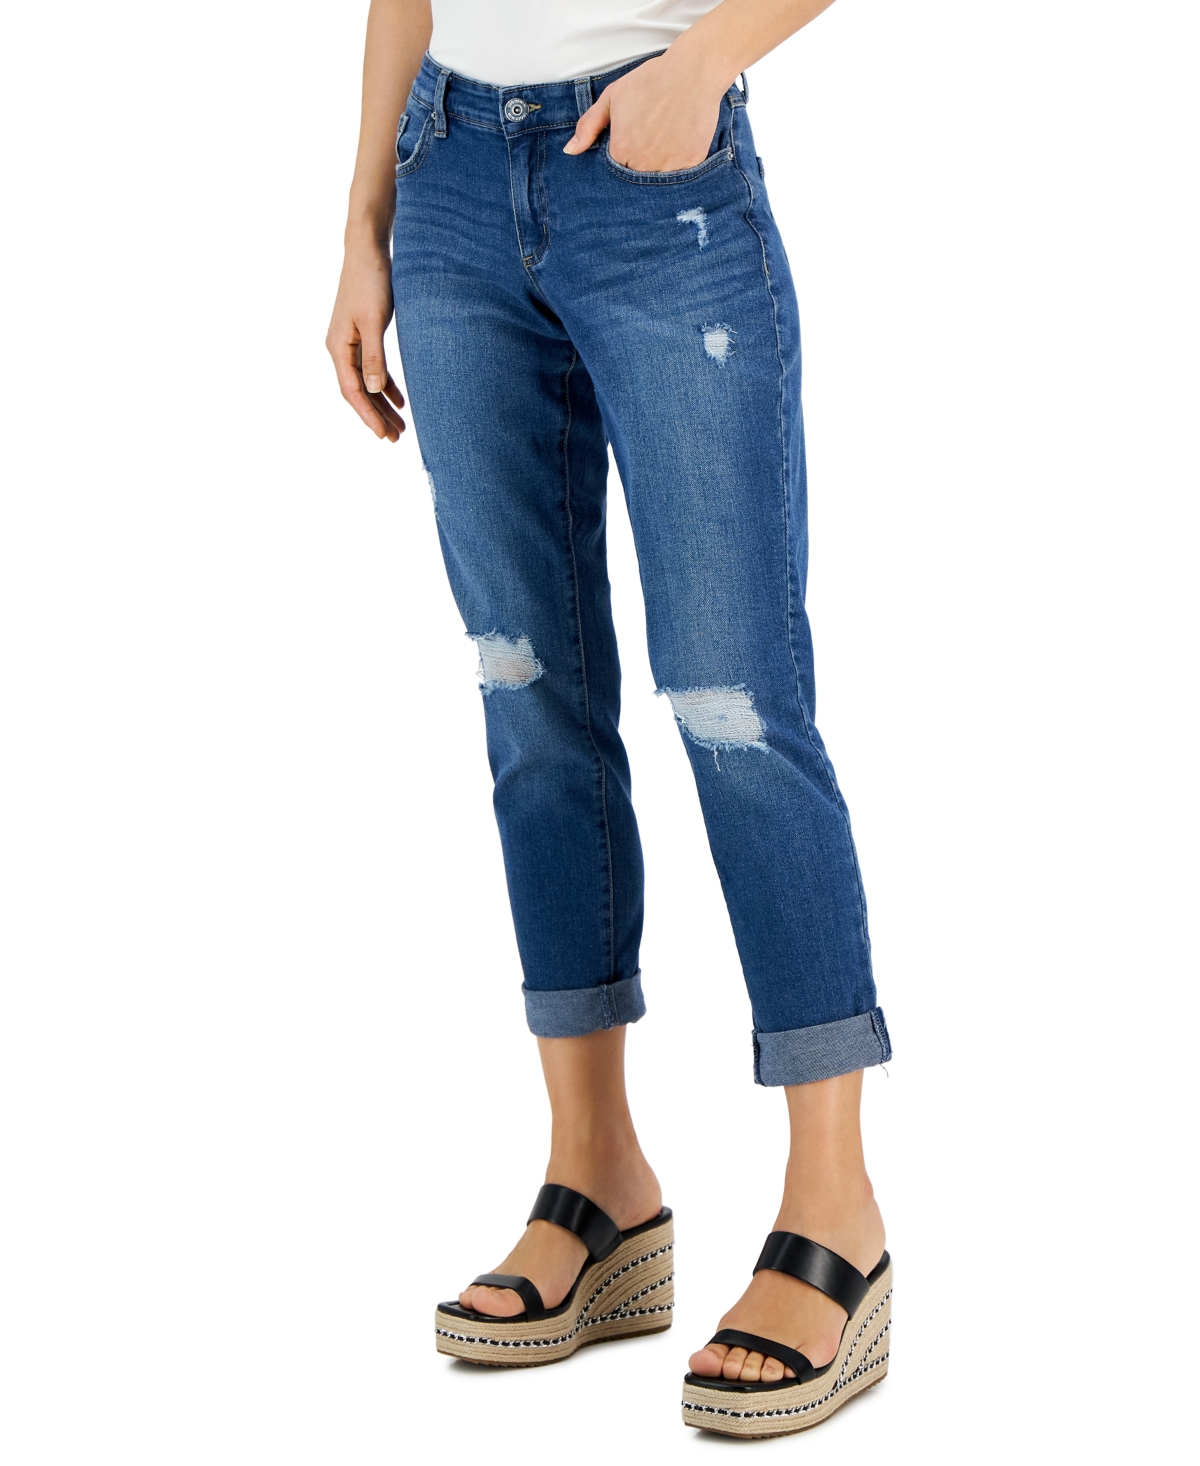  Inc International Concepts Women's Curvy Mid Rise Ripped Straight-Leg Jeans, Created for Macy's